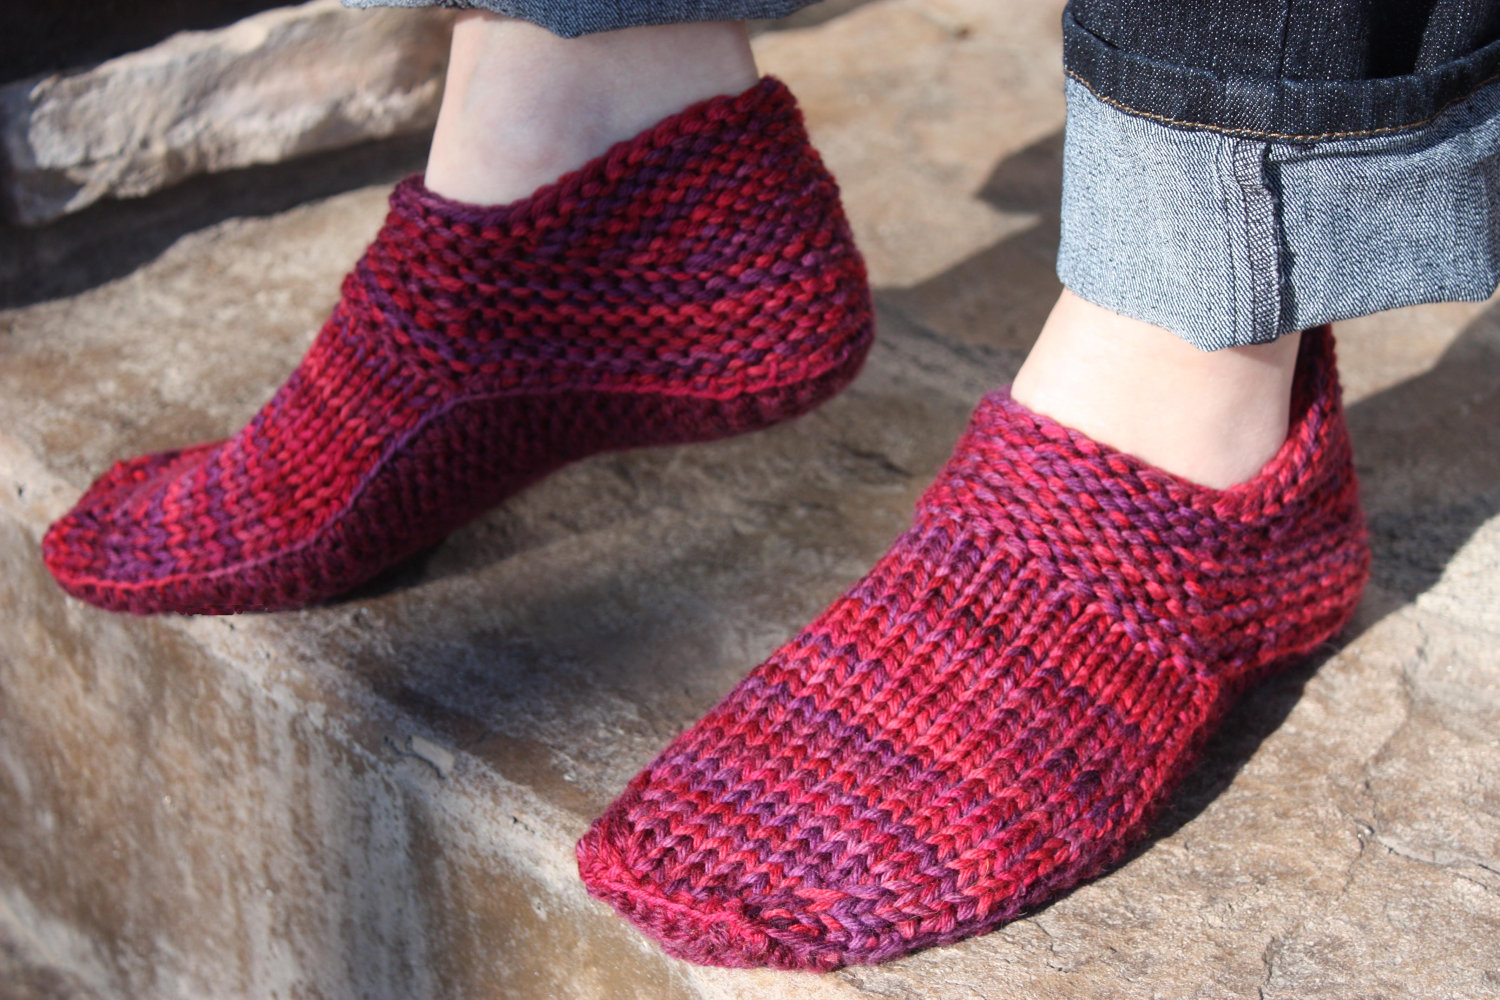 Free Knit Slipper Pattern Knitted Slippers To Keep Your Feet Warm And Cozy Crochet And